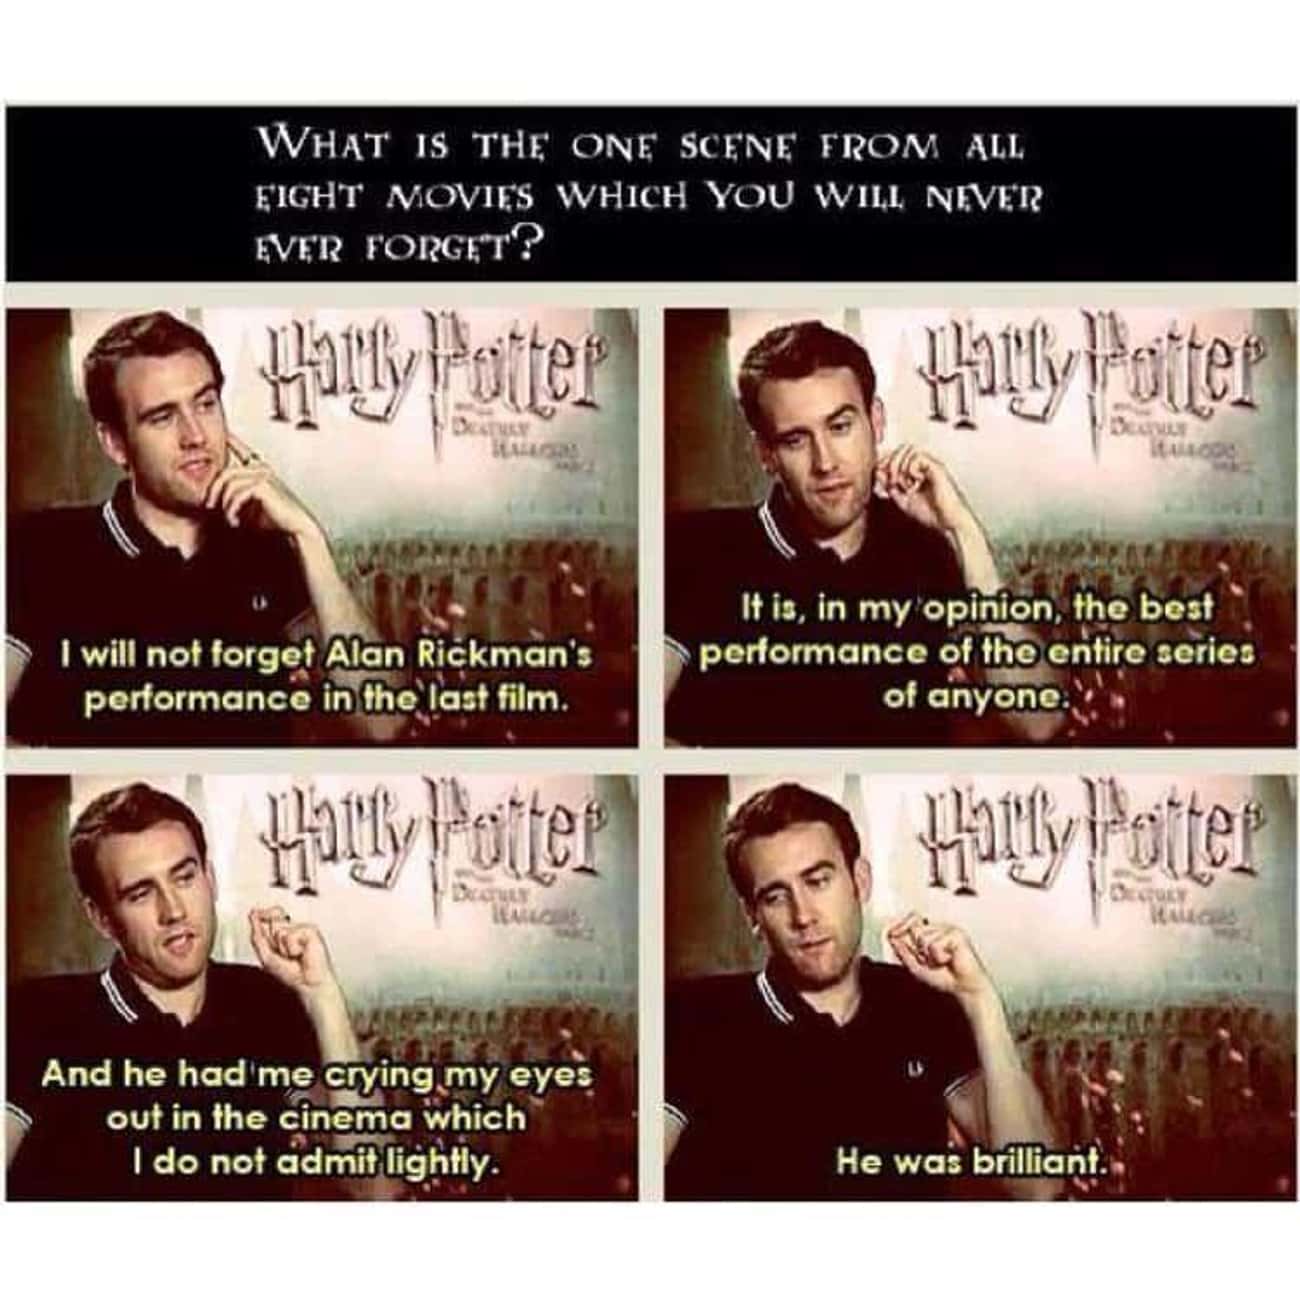 Matthew Lewis Thinks That Alan Rickman Had One Of The Best Performances In All Of The Films